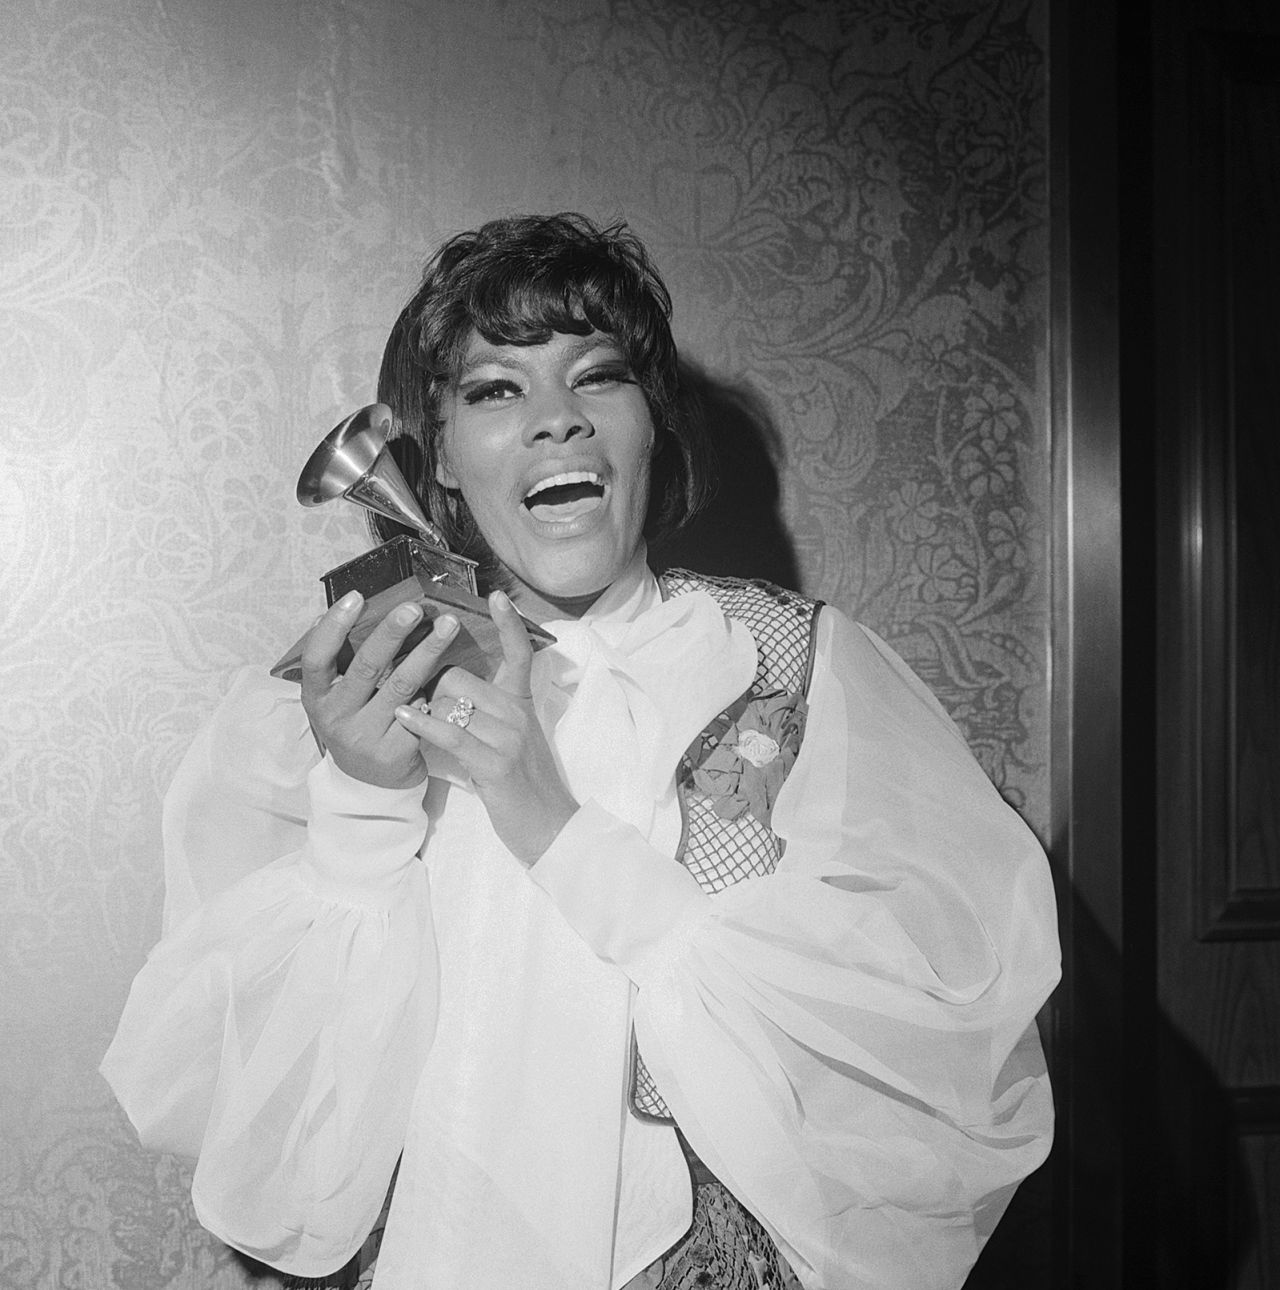 Warwick holds her first Grammy Award, which she won in 1969 for best female contemporary-pop vocal performance ("Do You Know the Way to San Jose").